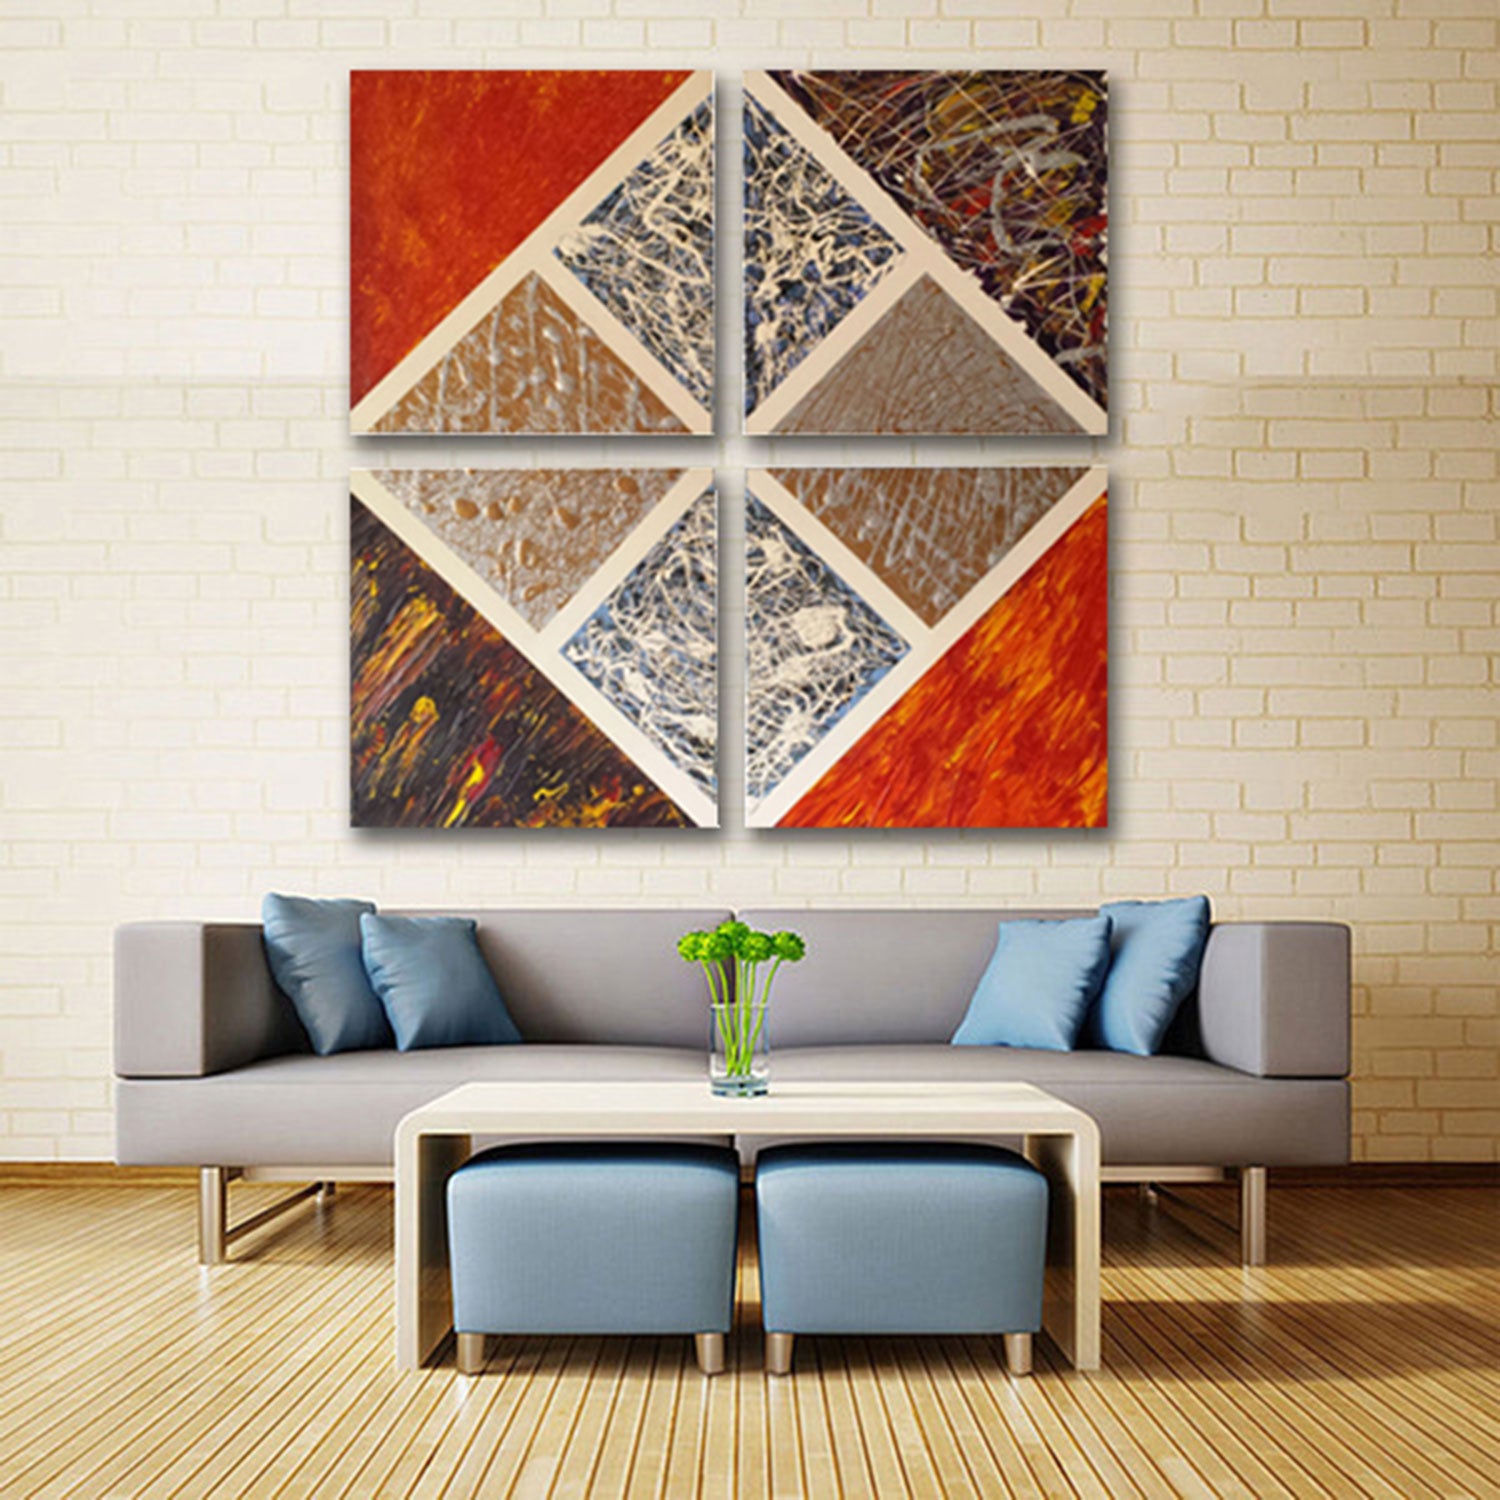 Chaos-in-the-sky-by-Alexandra-Romano-Art-Original-abstract-oil-painting-multi-panel-artwork-bold-vibrant-colorful-quadtriptych